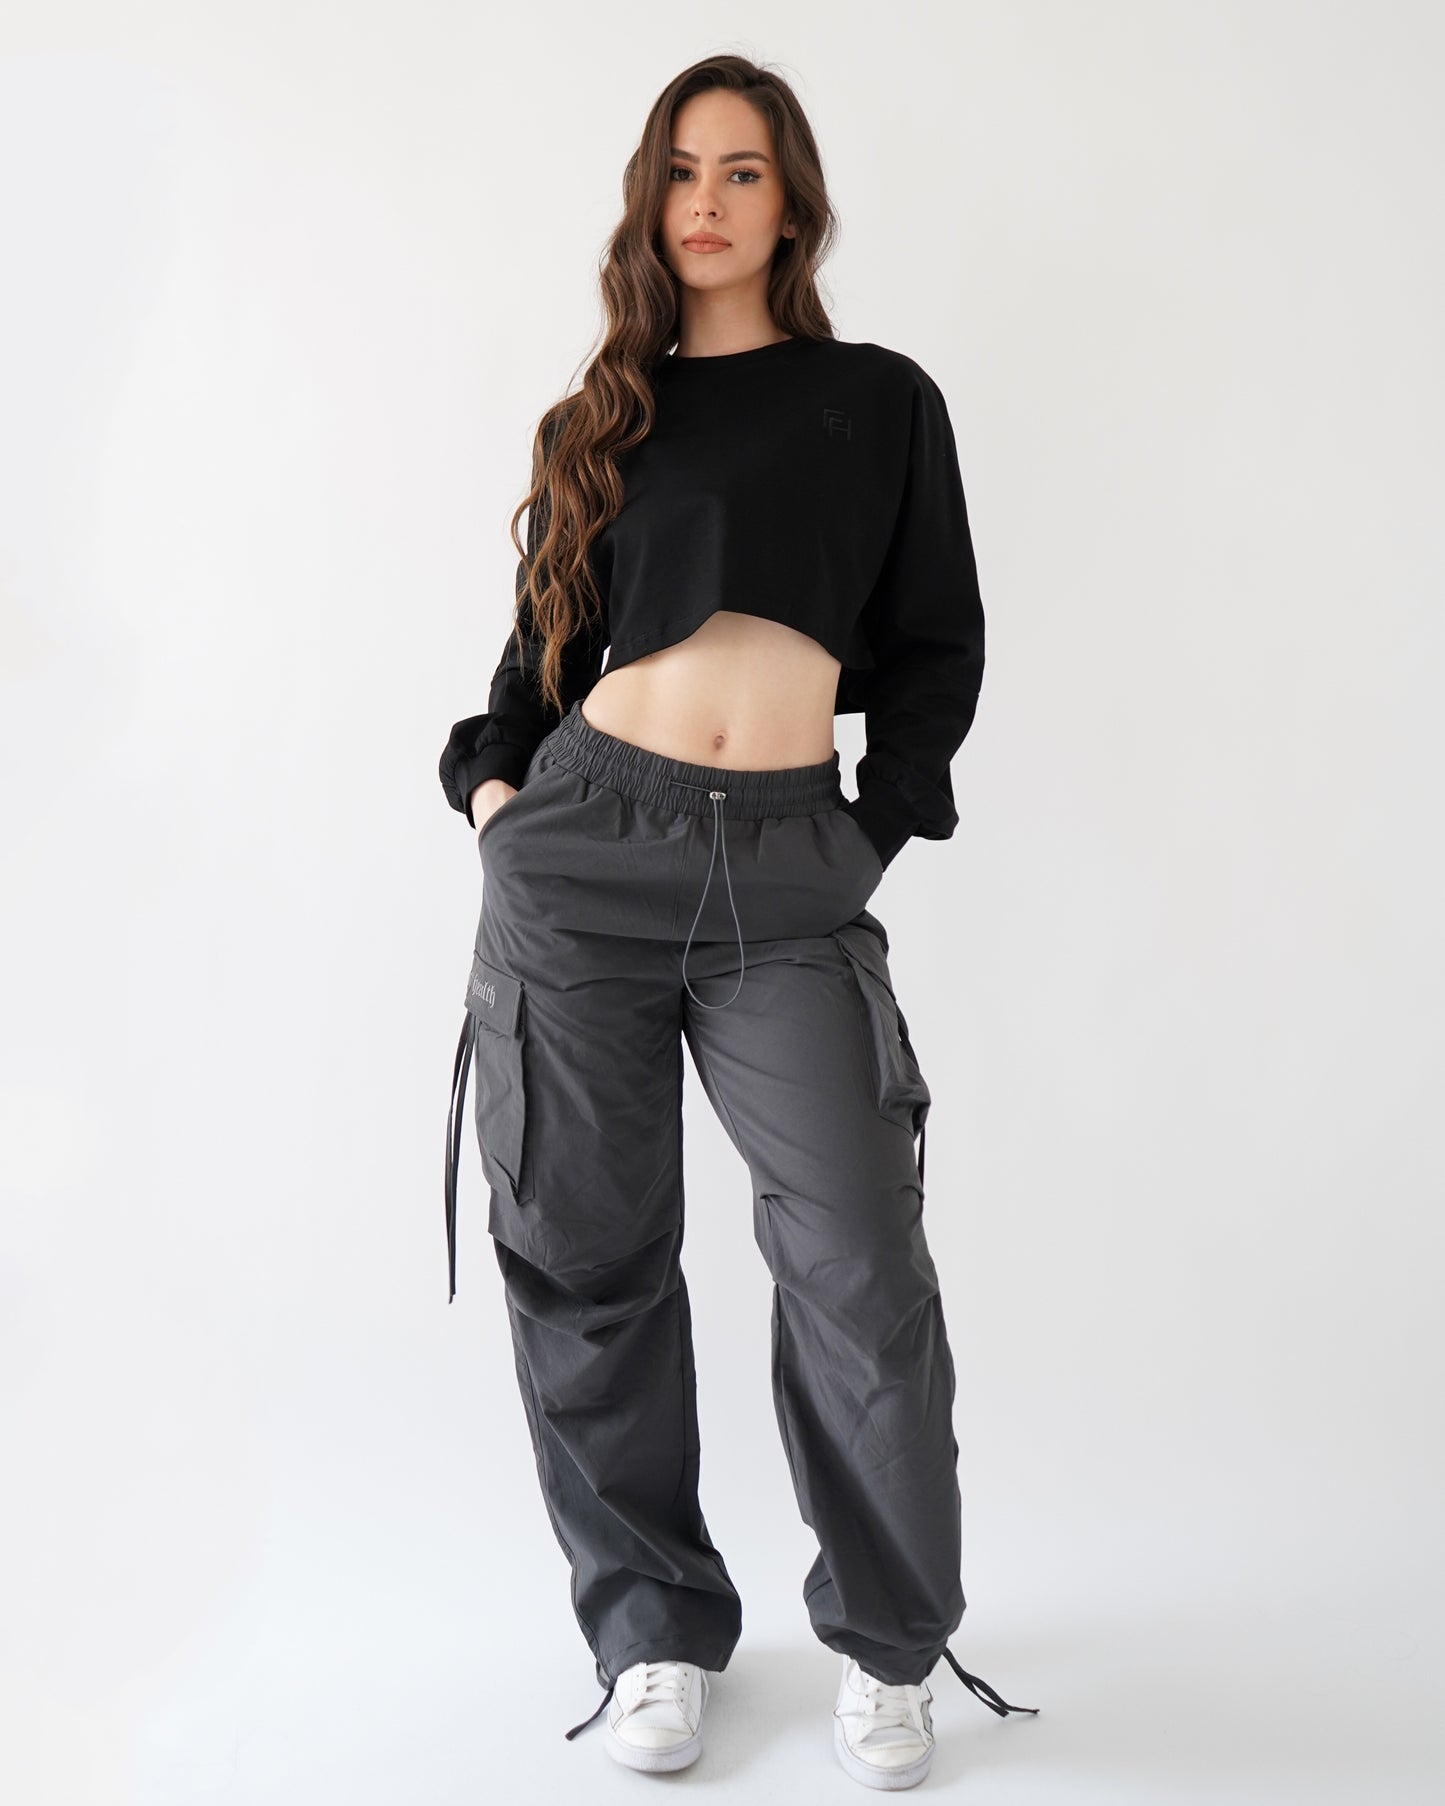 RELAXED CROP LONG SLEEVE - Black